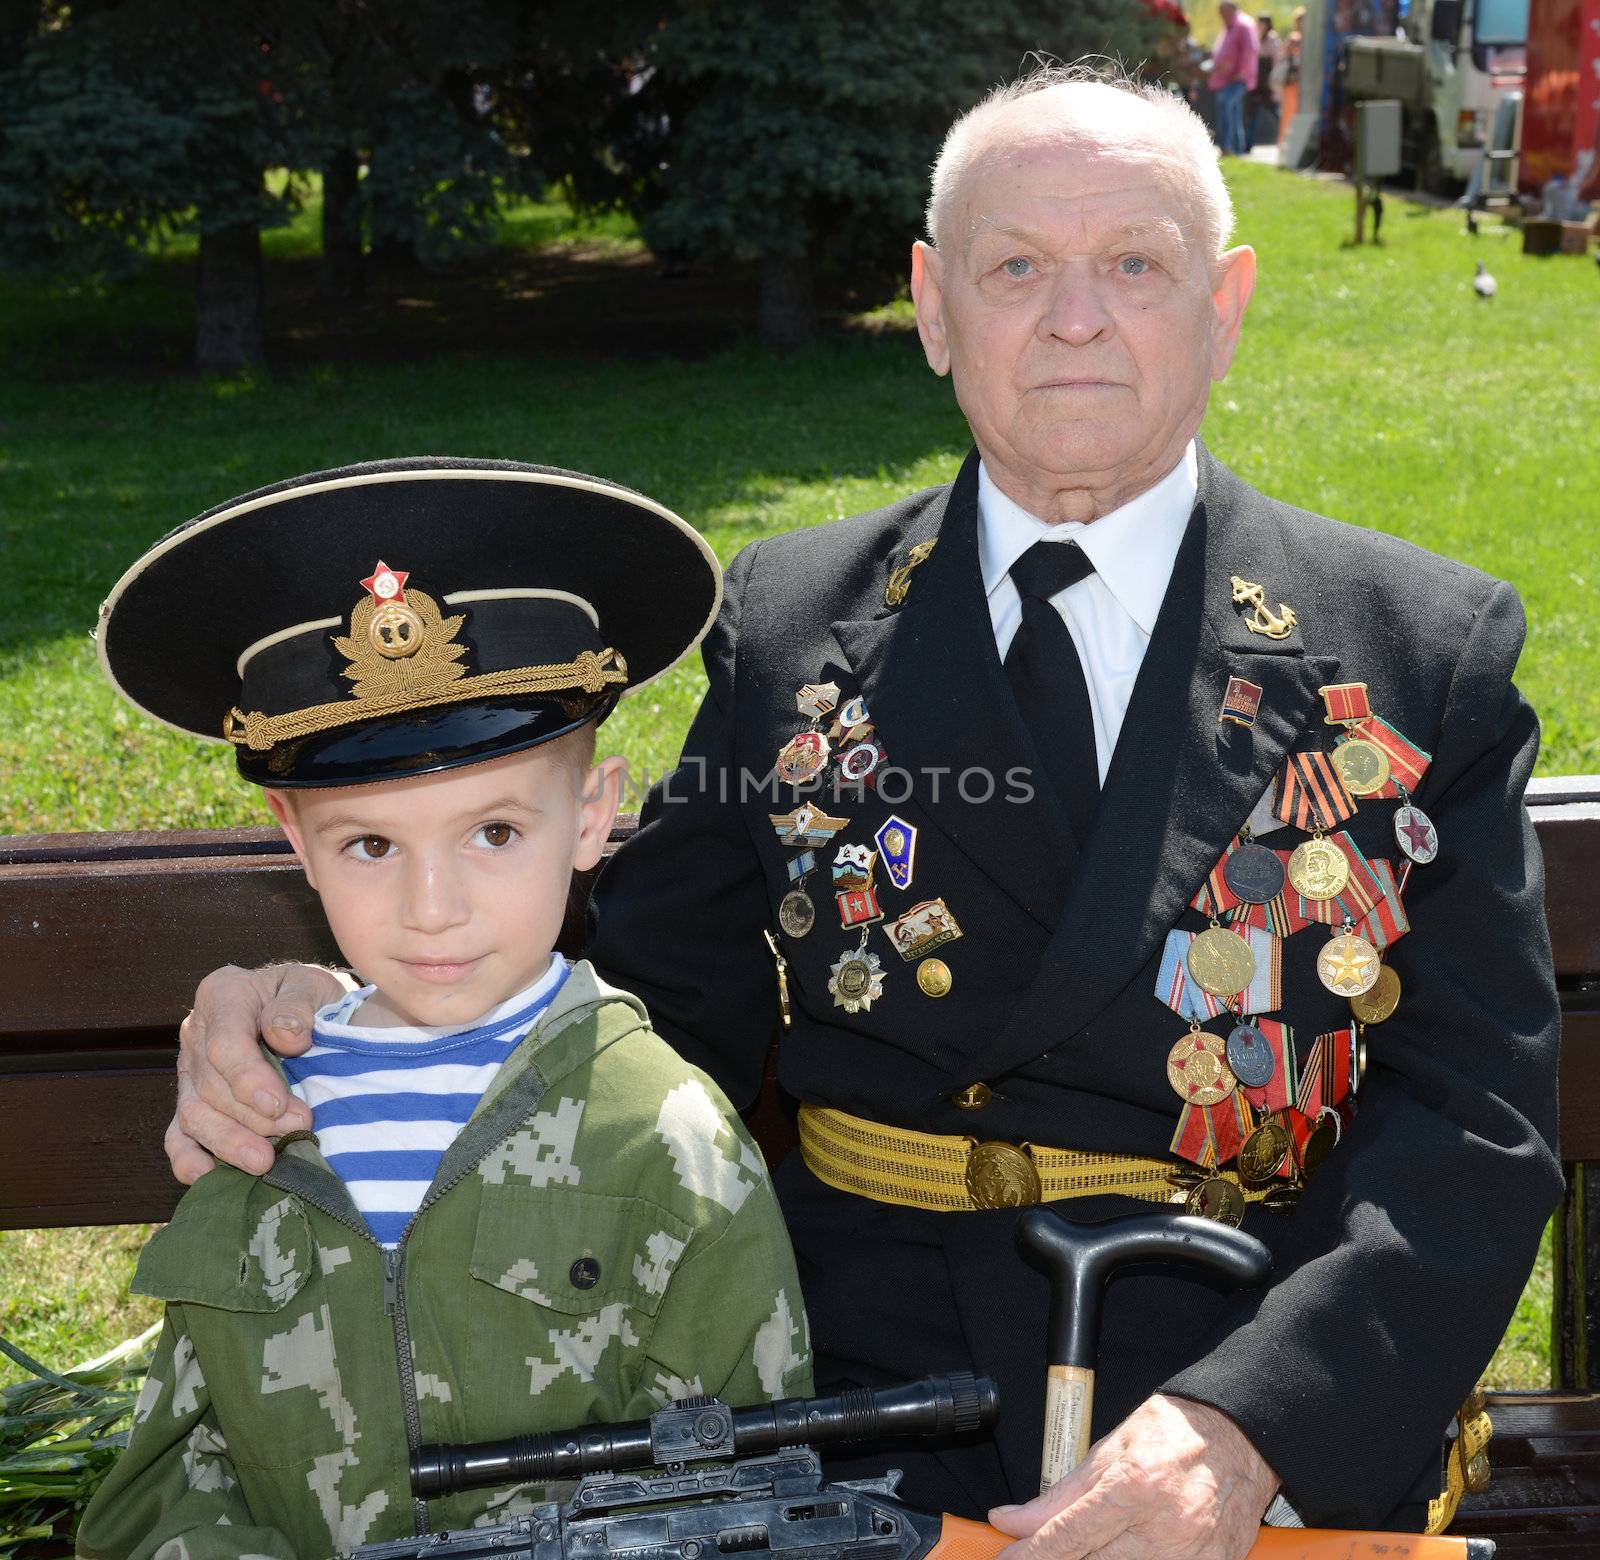 Moscow, Russia - May 9, 2013: Old man veteran of WWII in uniform decorated with numerous orders and medals and his grandson during festivities devoted to 68th anniversary of Victory Day.